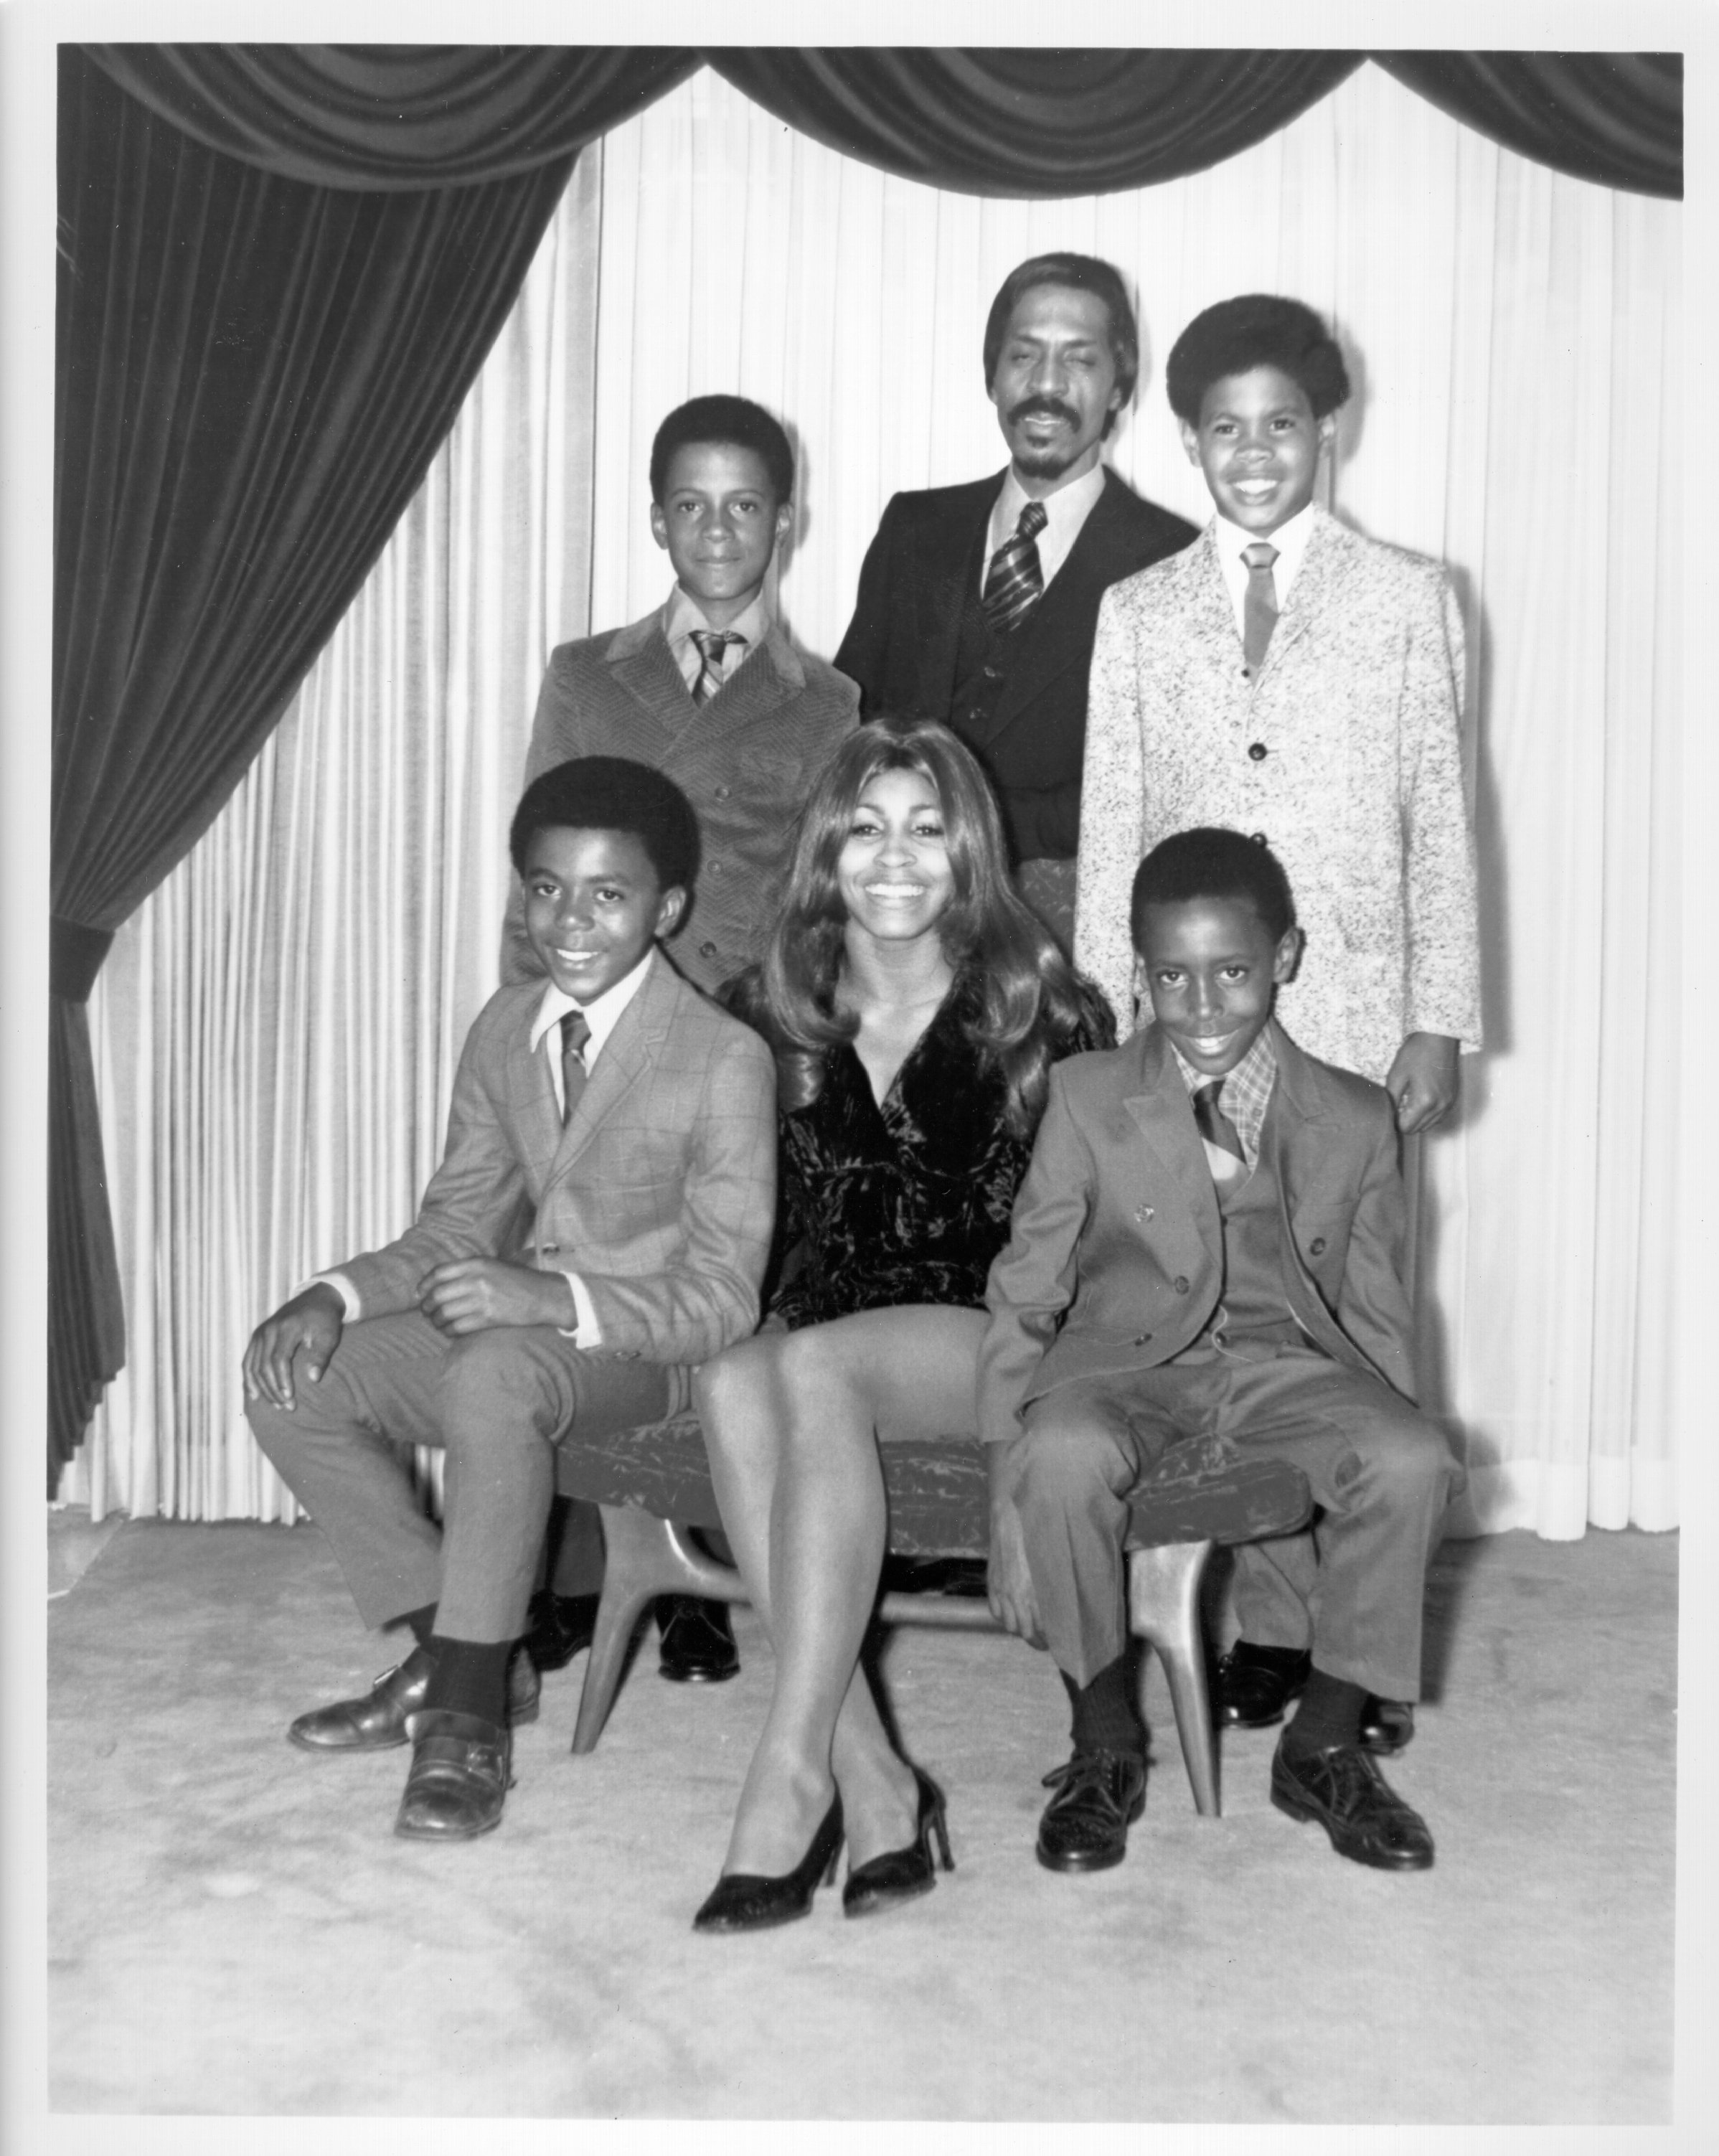 Musicians Ike and Tina Turner pose for a portrait with their son and step-sons. From bottom left: Michael Turner, Ike Turner, Jr., Ike Turner, Craig Hill, and Ronnie Turner in 1972 ┃Source: Getty Images